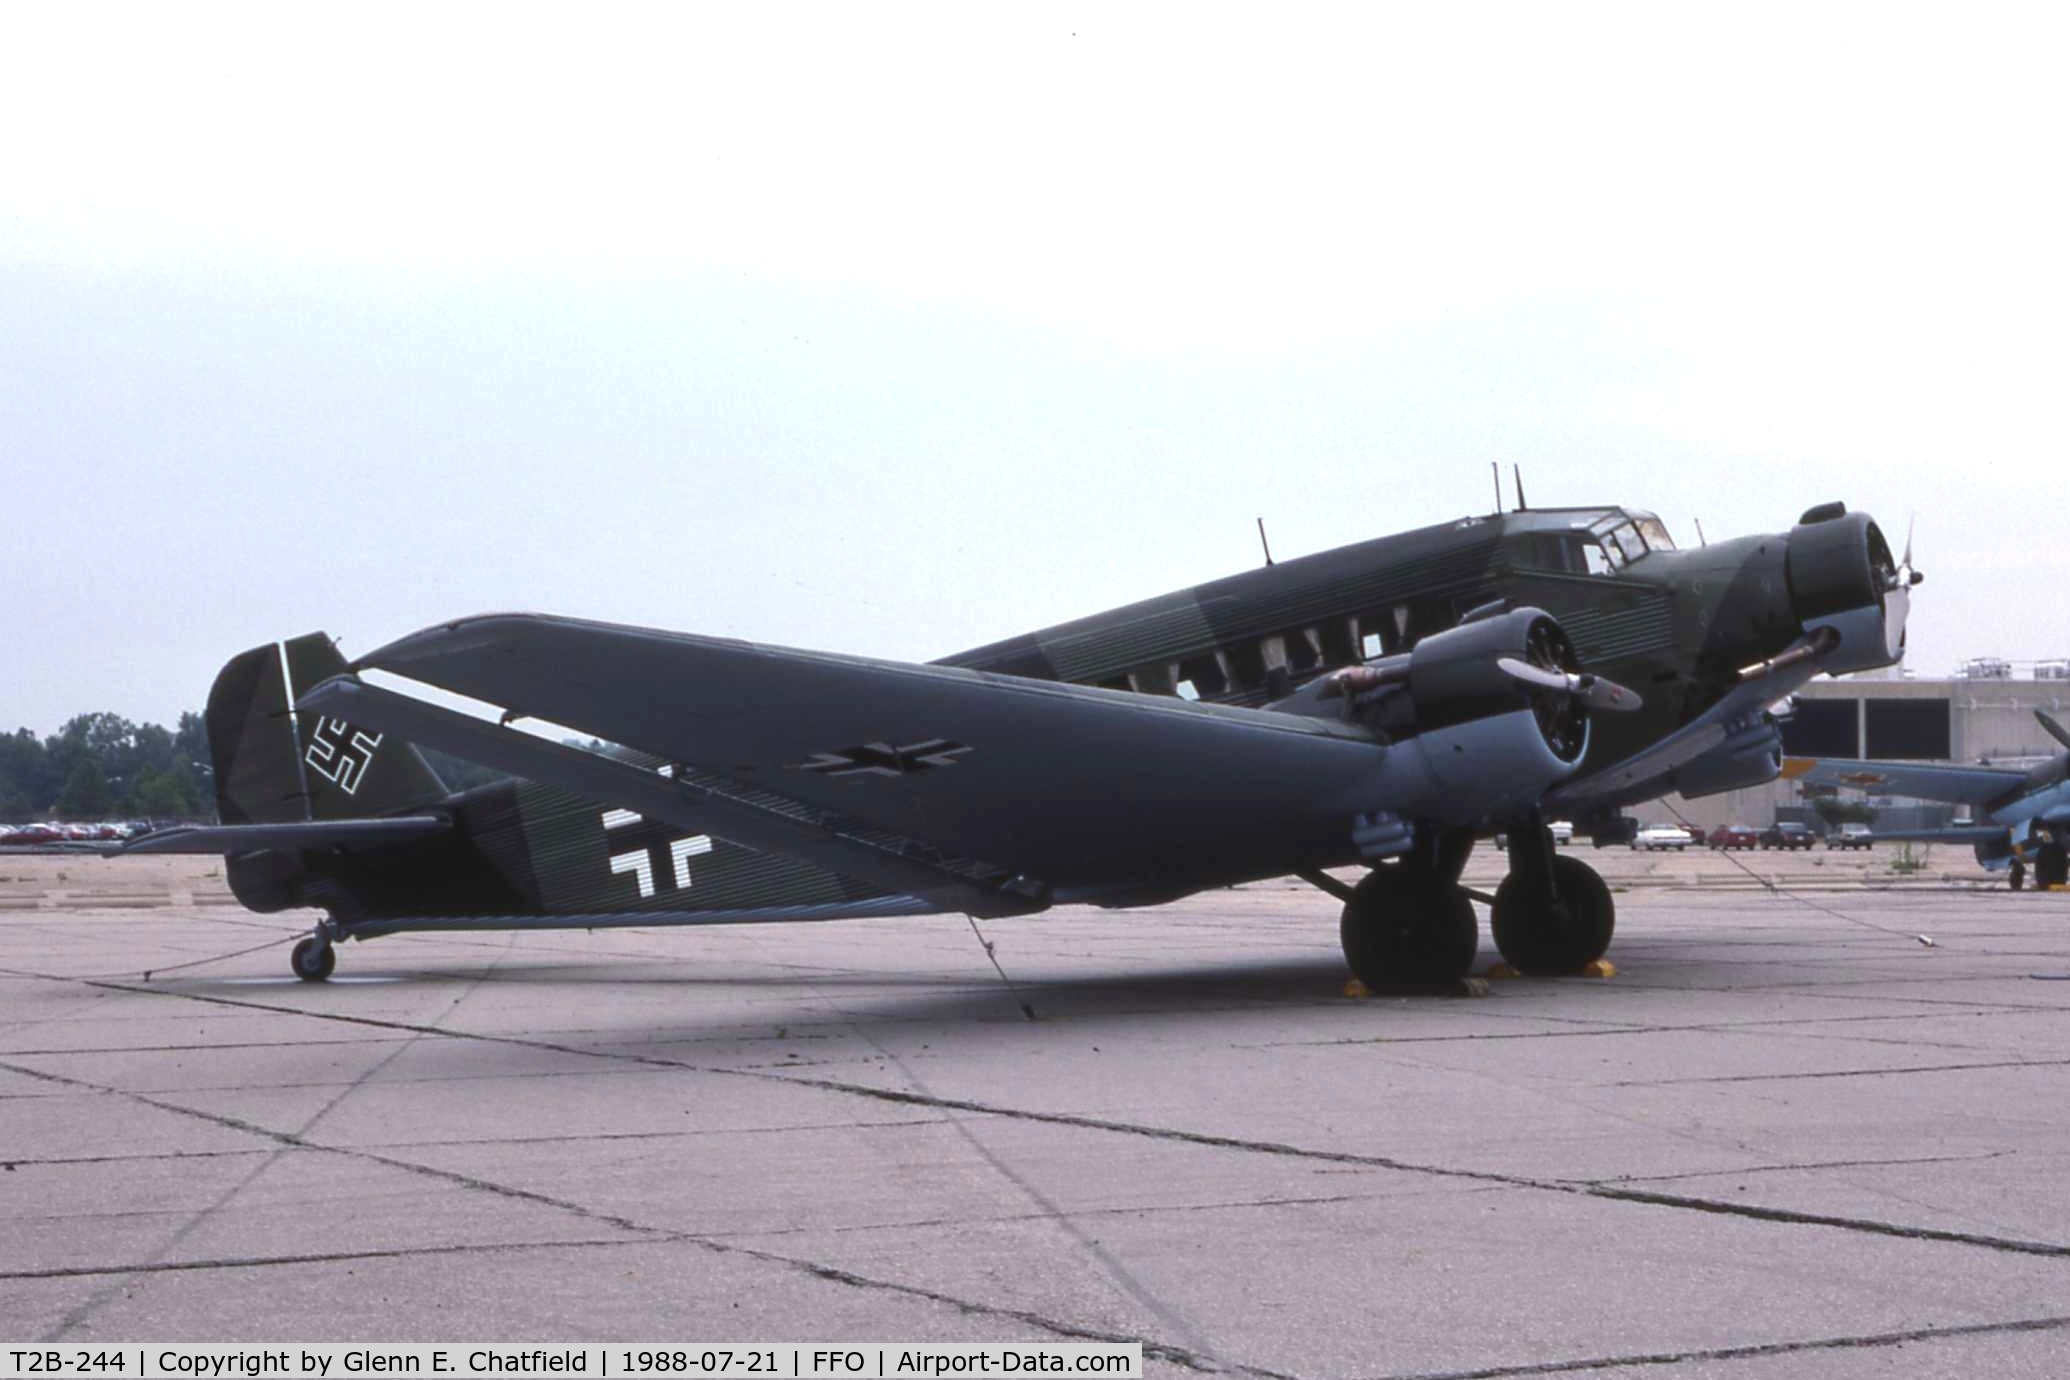 T2B-244, Junkers (CASA) 352L (Ju-52) C/N 135, At the National Museum of the U.S. Air Force